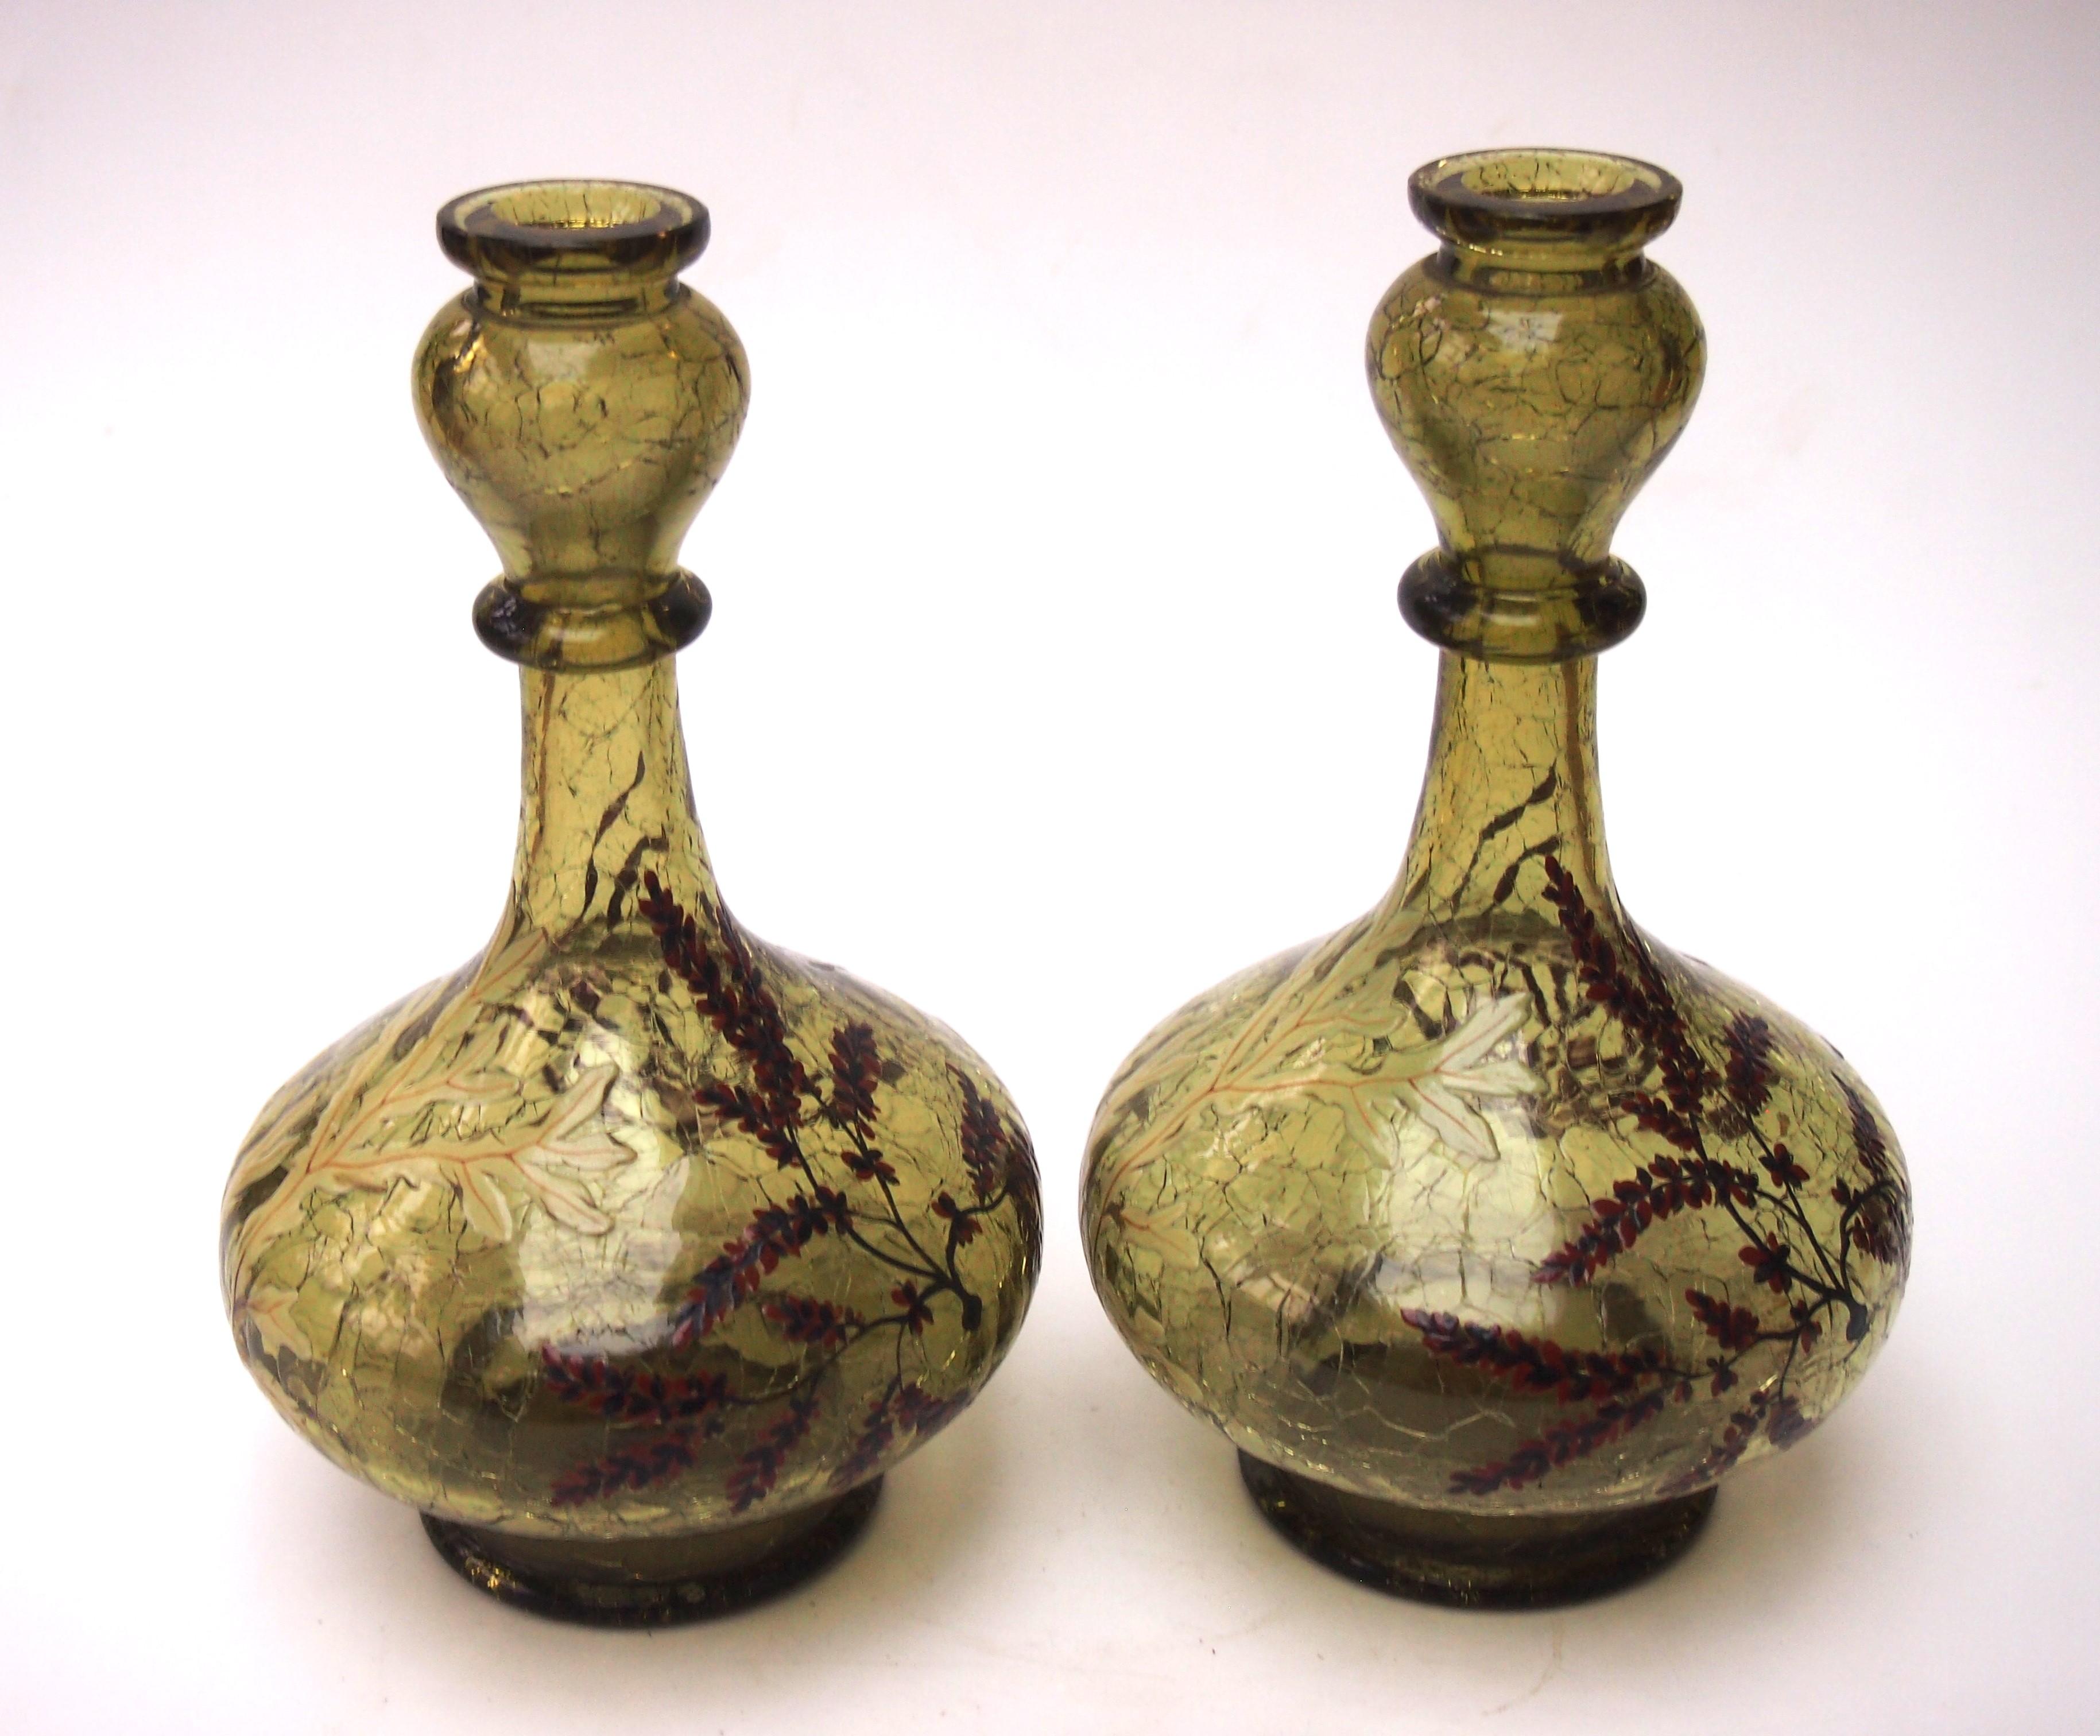 Iconic early Moser Crackle glass pair of vases in deep sea green colour heavily and finely enamelled with a classic aquatic scene including various types of seaweed mostly in purples and pale green. The vases are hand blown and have cold cut tops,